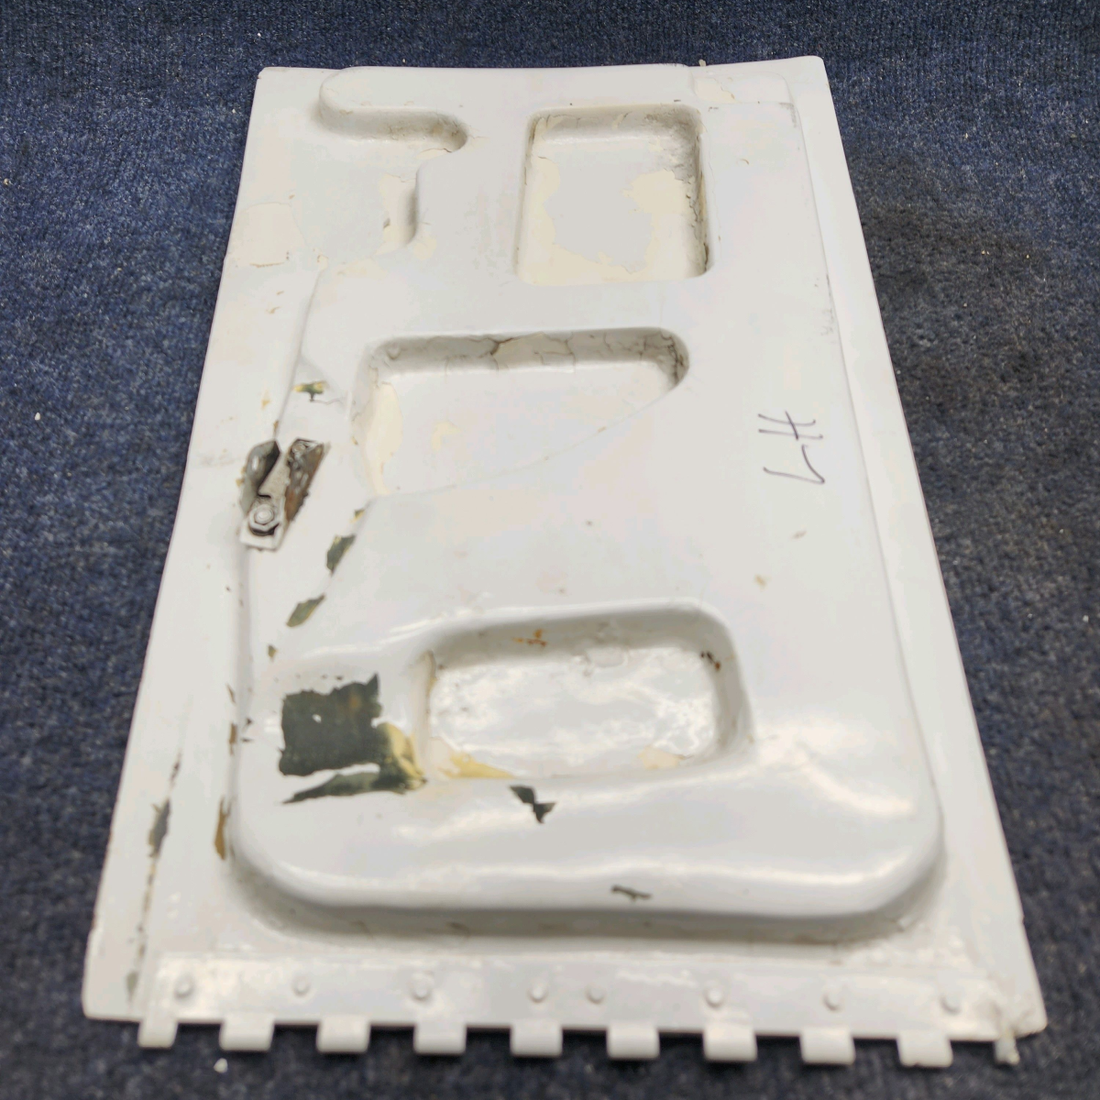 Used aircraft parts for sale, 7090-010 Piper PA32RT-300 LH MAIN GEAR DOOR ASSEMBLY